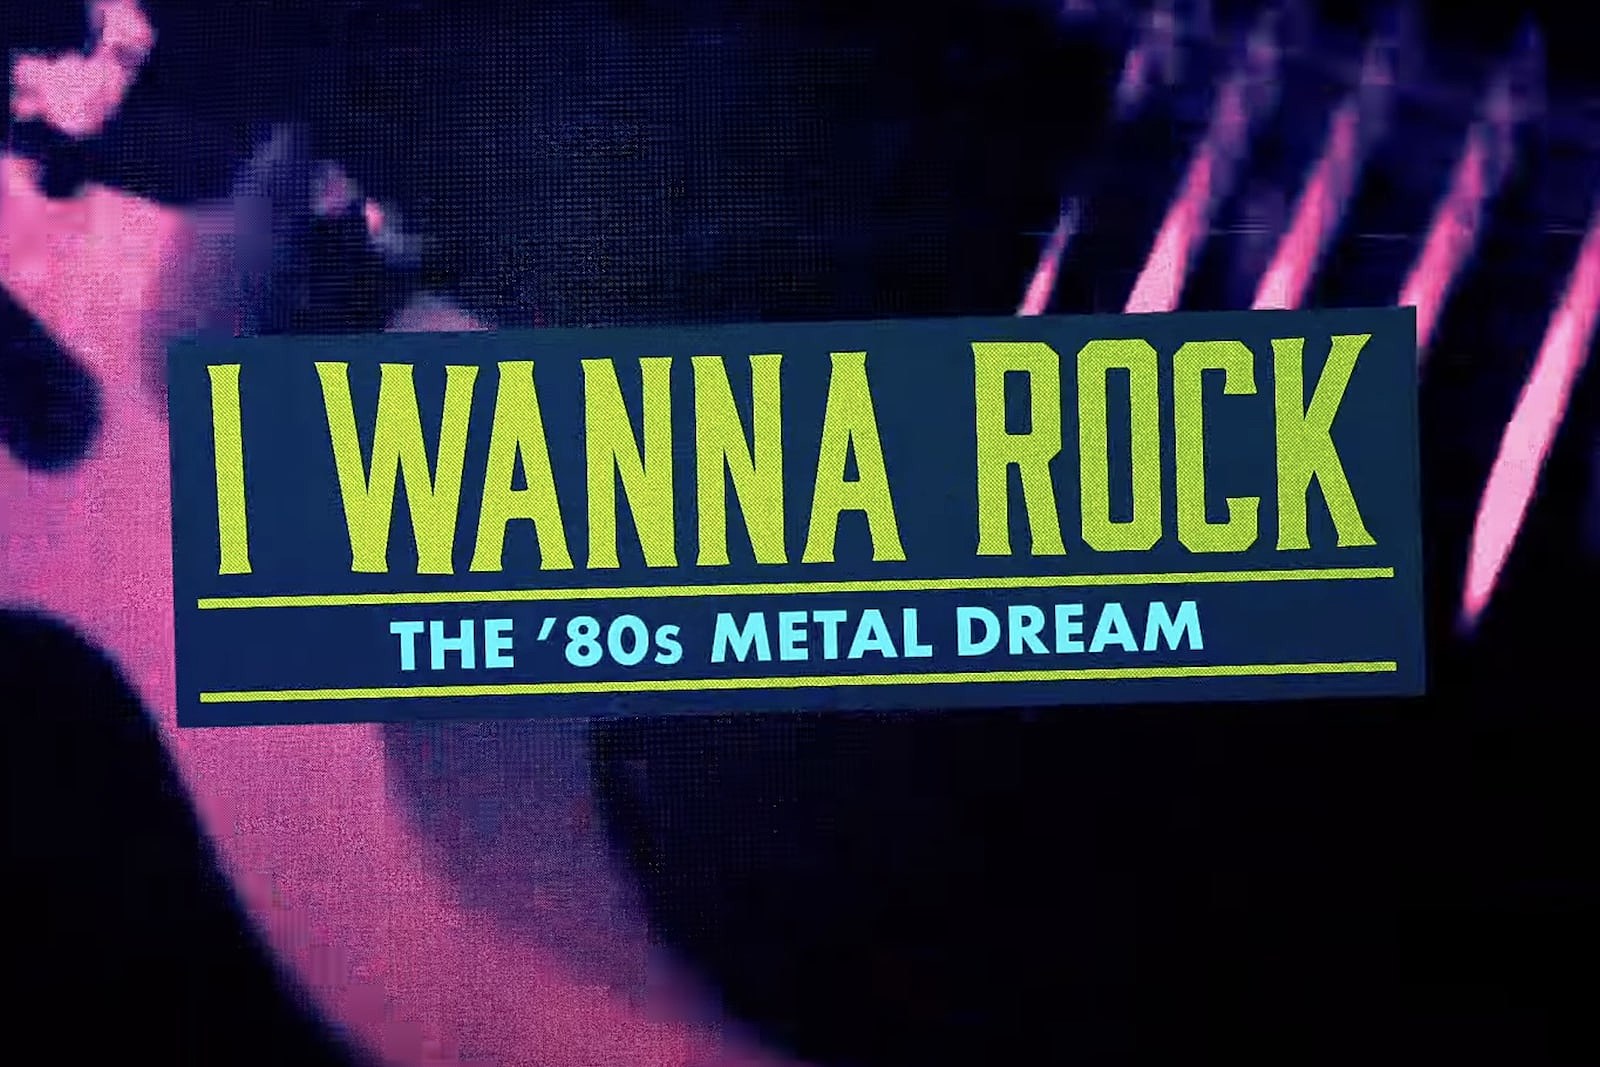 Paramount+’s New Docuseries "I Wanna Rock: The '80s Metal Dream" Premieres Today on July 18